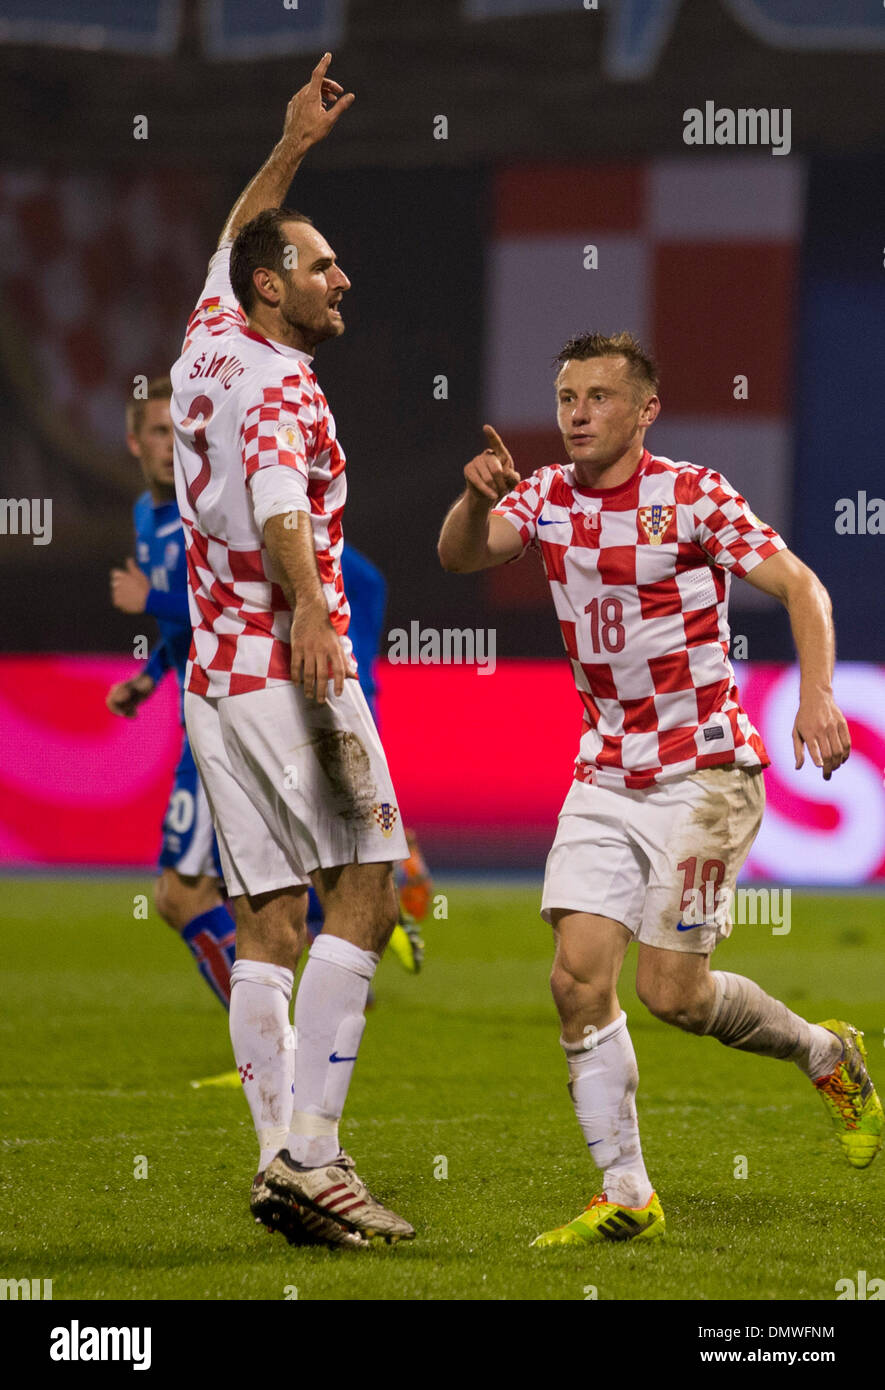 (131217) -- ZAGREB, Dec. 17, 2013 (Xinhua) -- Photo taken on Nov. 19, 2013 shows Josip Simunic of Croatia (L) gestures during 2014 FIFA World Cup qualifying match against Iceland at Maksimir stadium in Zagreb, Croatia.     FIFA handed Croatia defender Josip Simunic a 10-game ban to make him miss the entire World Cup after he led fans into a pro-Nazi chant following the play-off win over Iceland last month. The world soccer's governing body confirmed on Monday that Simunic's ban will start at the World Cup in Brazil, and that he will also be banned from entering the stadium for any of his count Stock Photo